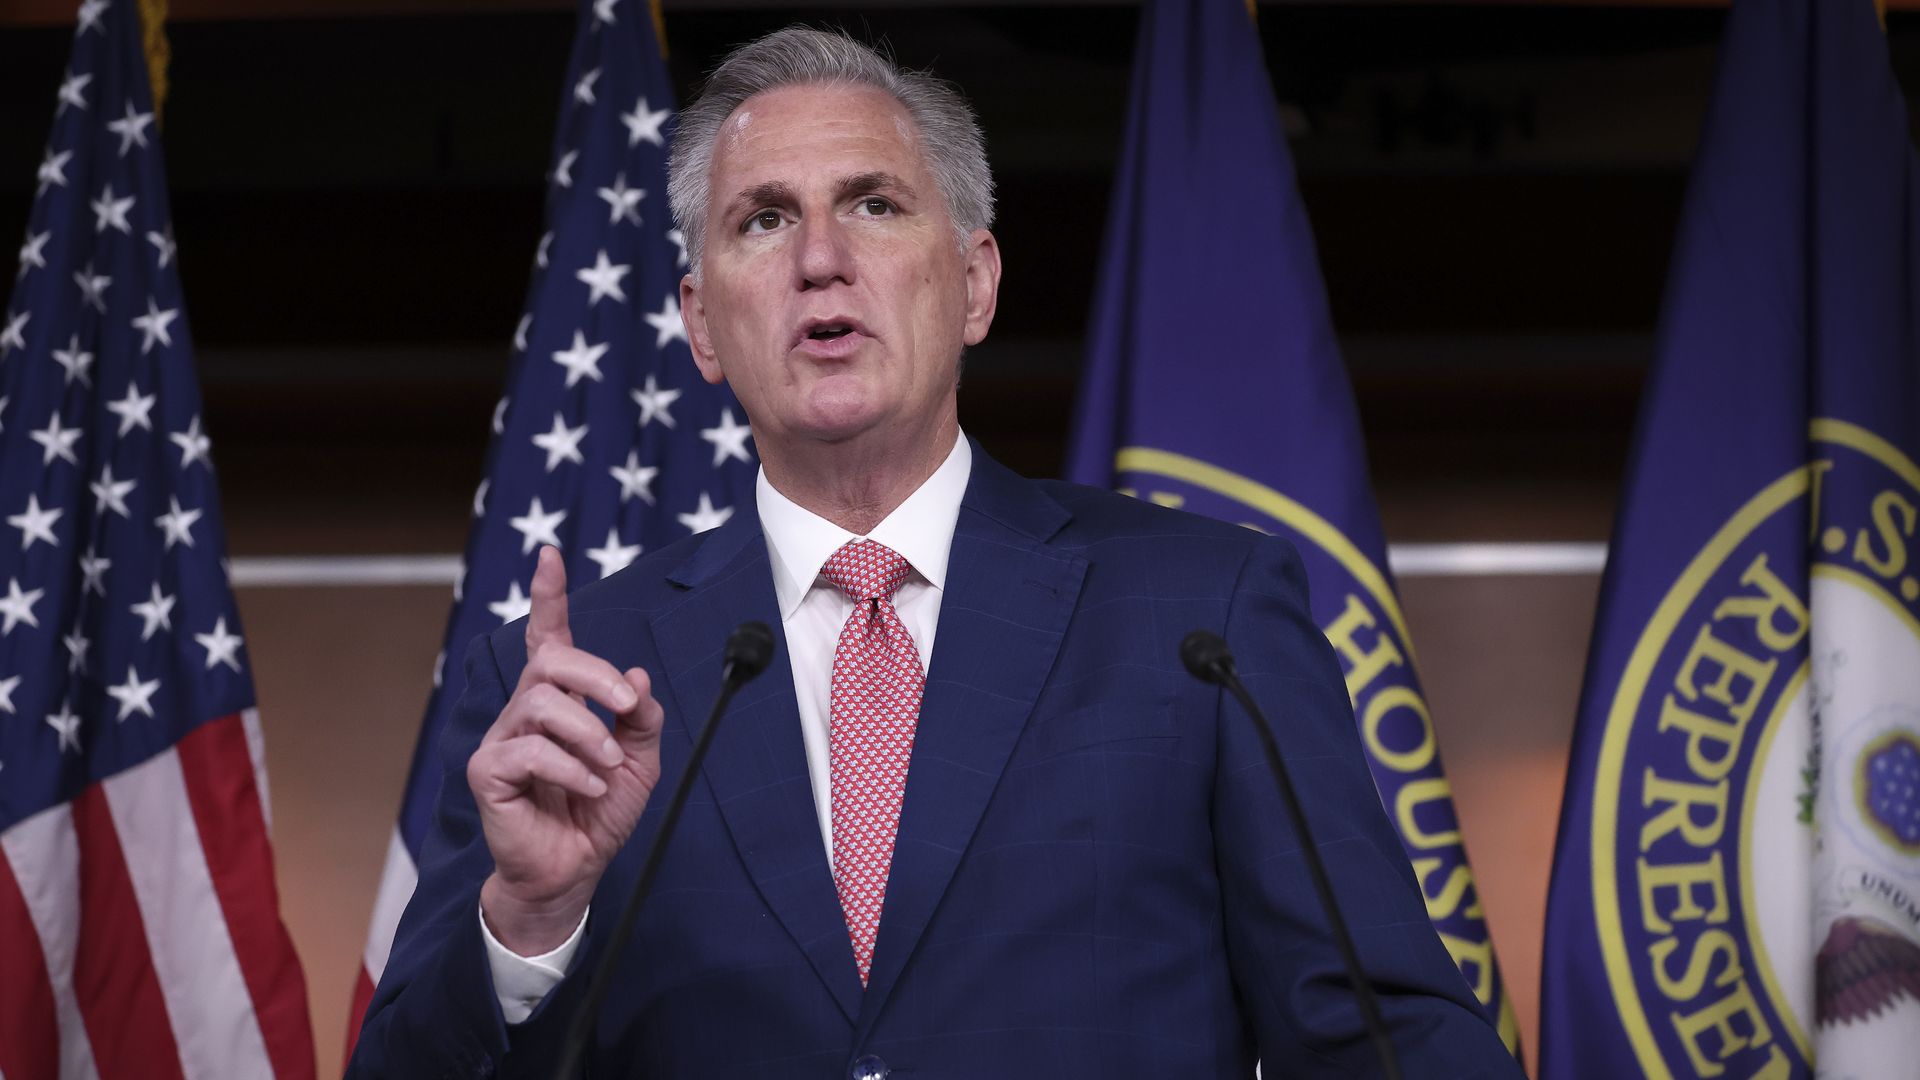 House Minority Leader Kevin McCarthy (R-CA) answers questions during a press conference at the U.S. Capitol on July 29, 2022